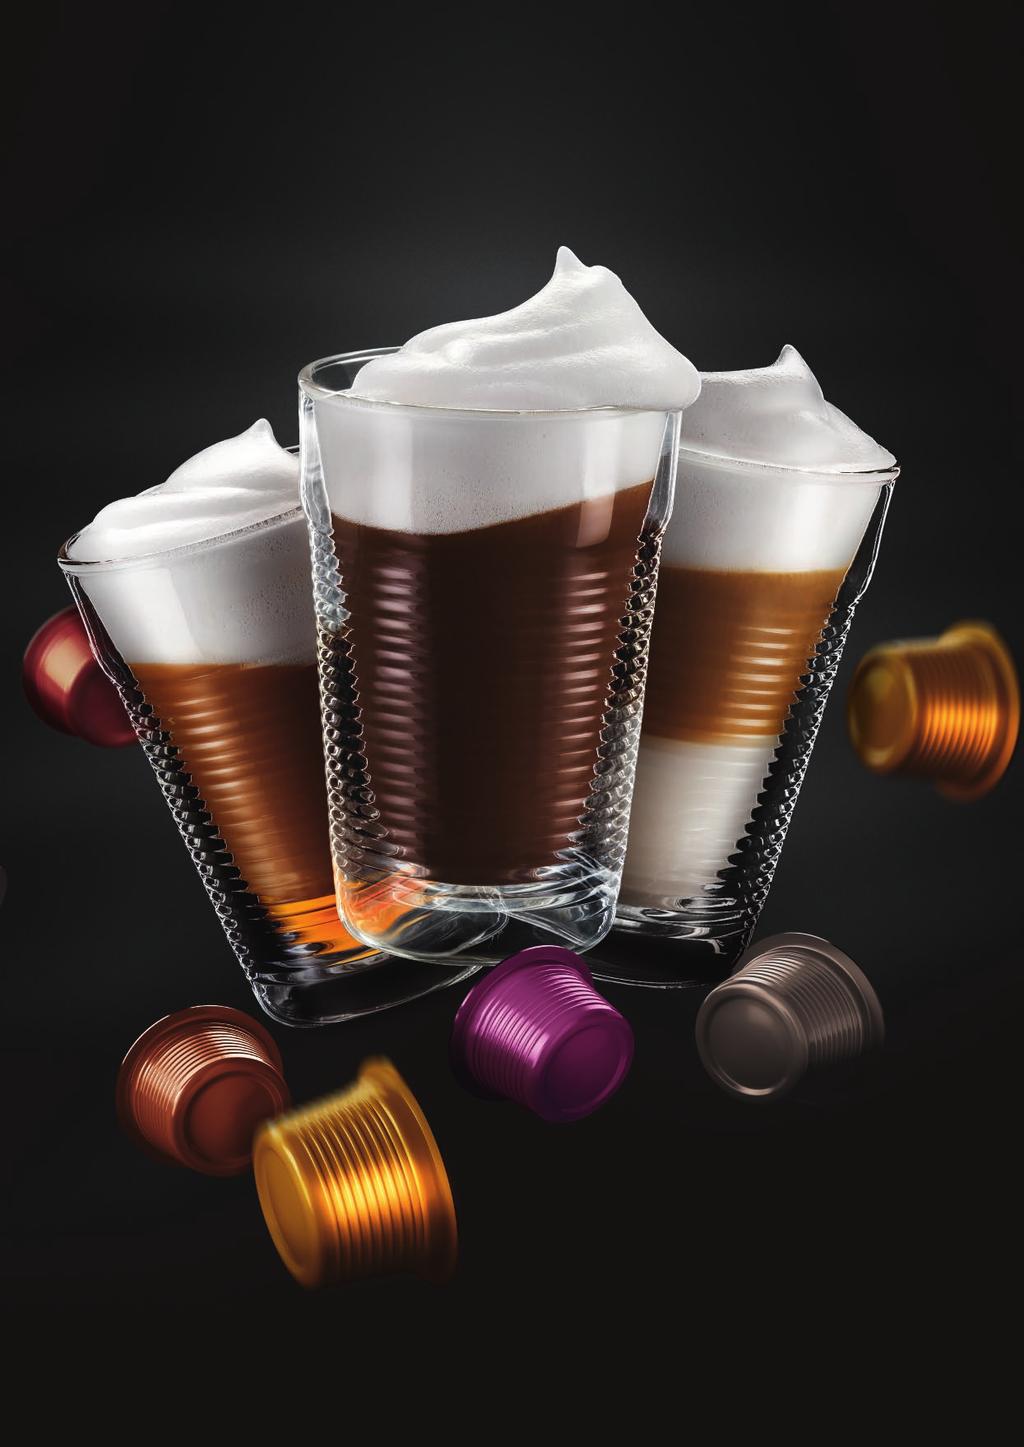 ANYONE CAN BE A BARISTA. This compact all-rounder simply does everything and delivers café-quality. DREAMY MILK FOAM. Thanks to Foammaster technology, the milk is always foamed as though by hand.